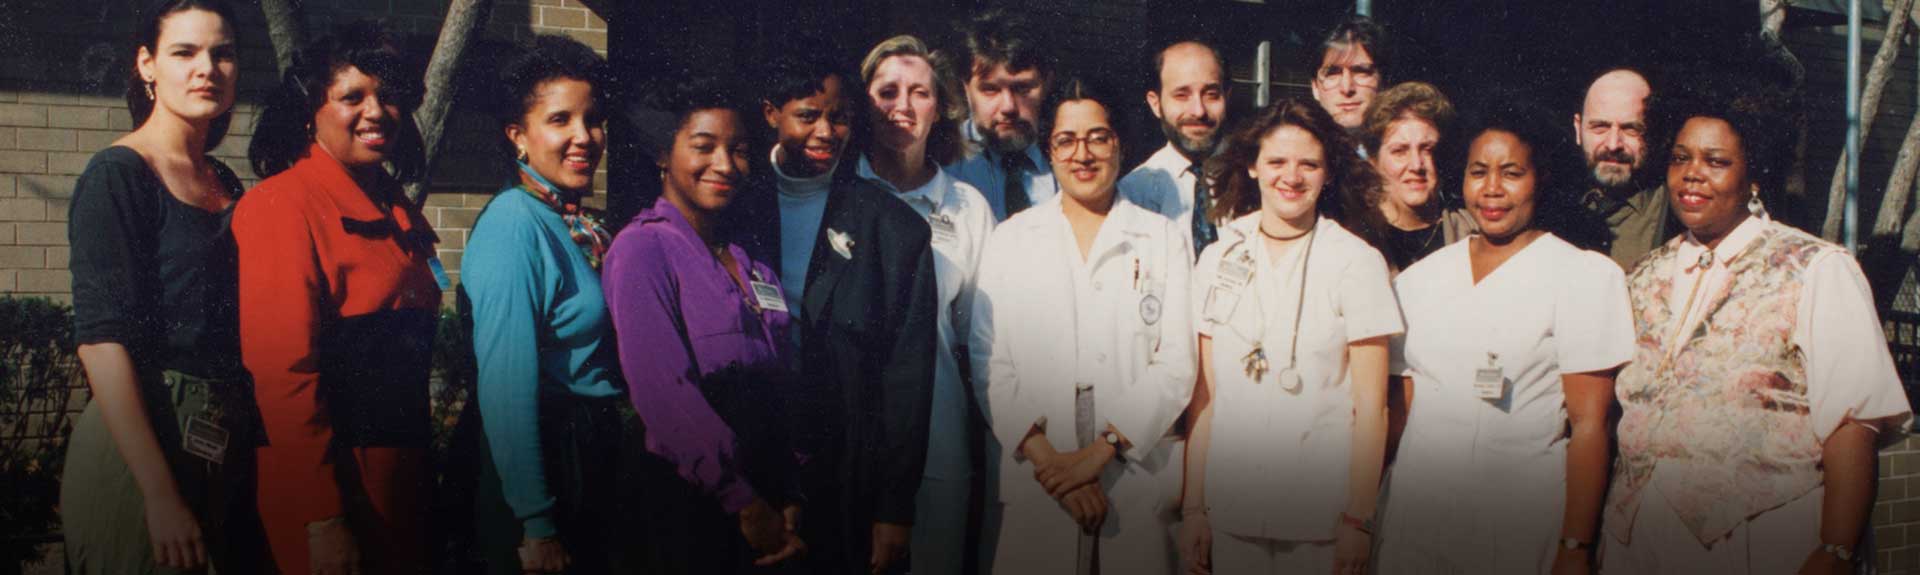 Image of group of doctors